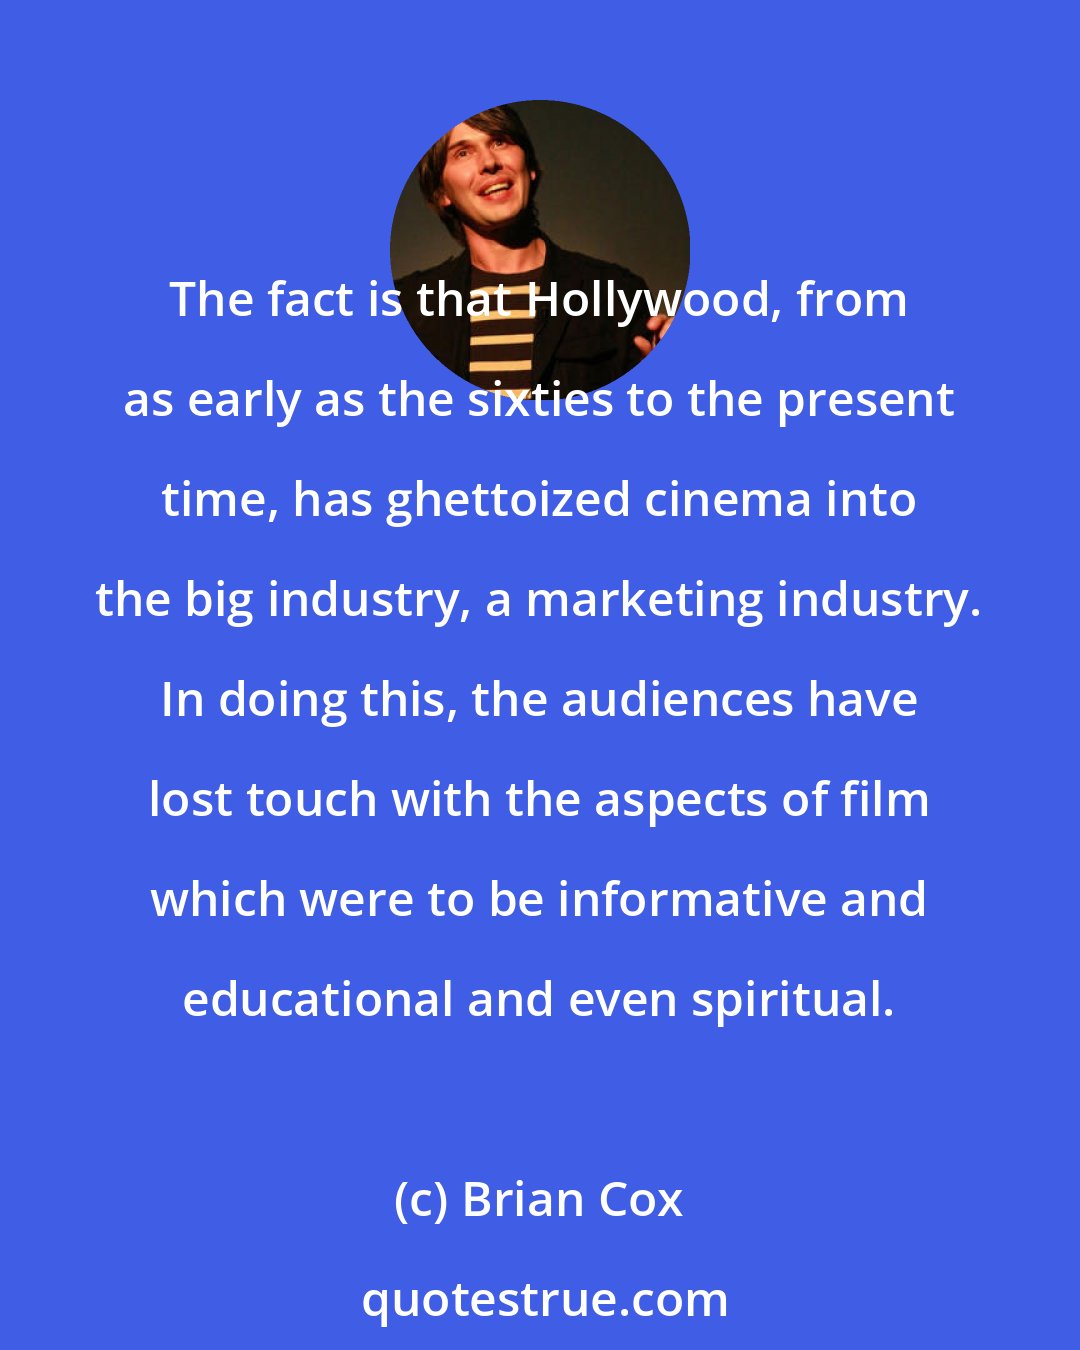 Brian Cox: The fact is that Hollywood, from as early as the sixties to the present time, has ghettoized cinema into the big industry, a marketing industry. In doing this, the audiences have lost touch with the aspects of film which were to be informative and educational and even spiritual.